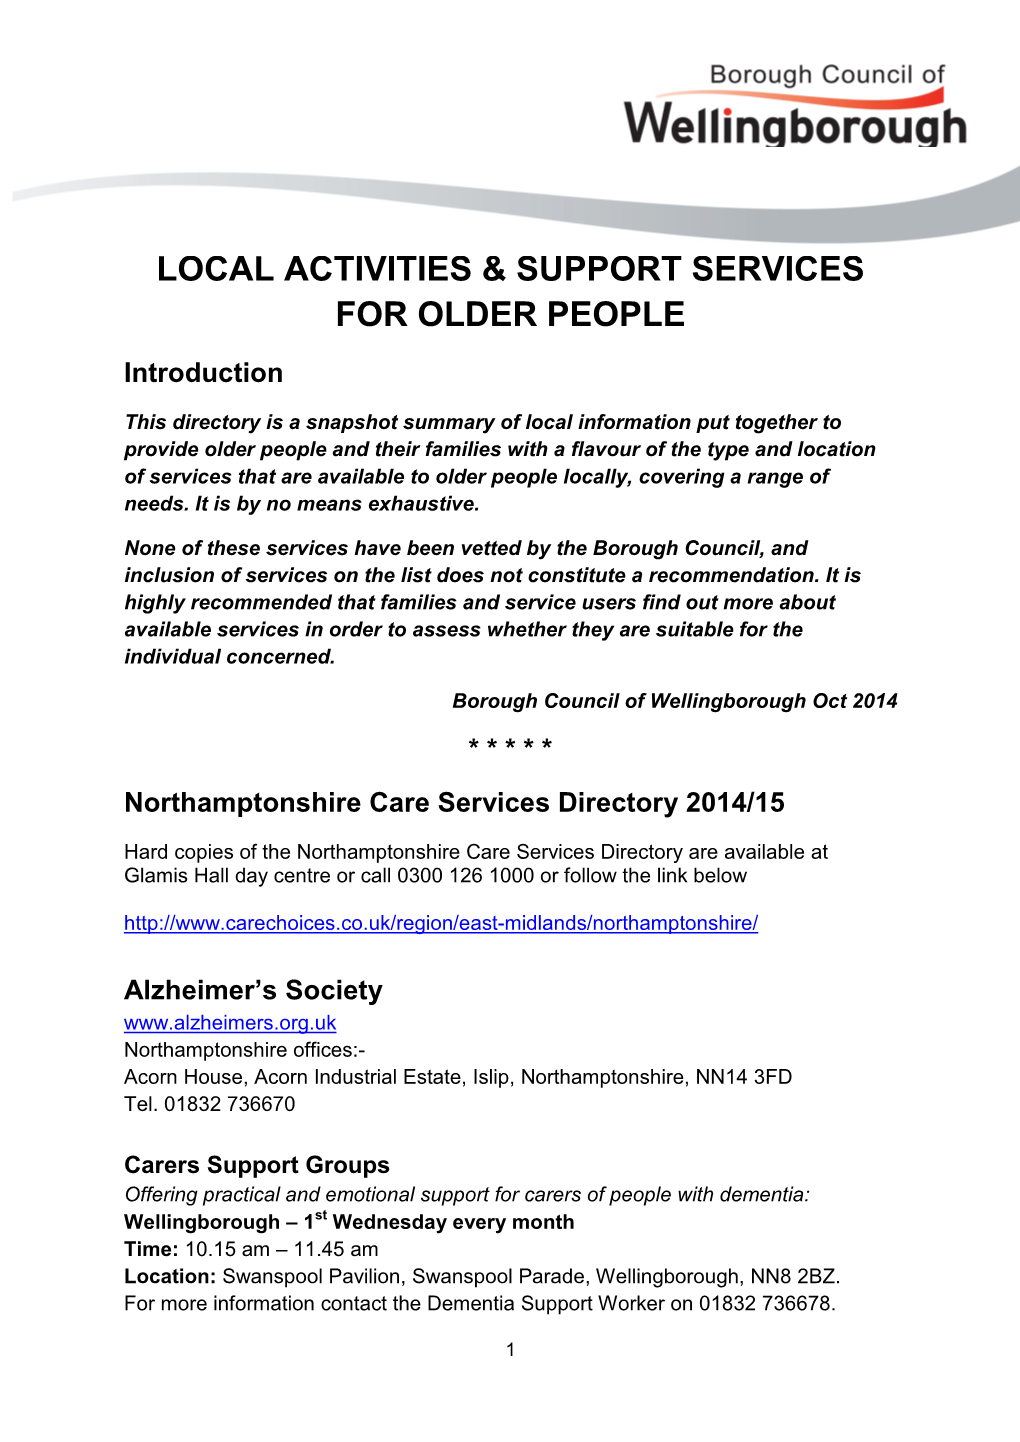 Local Activities & Support Services for Older People